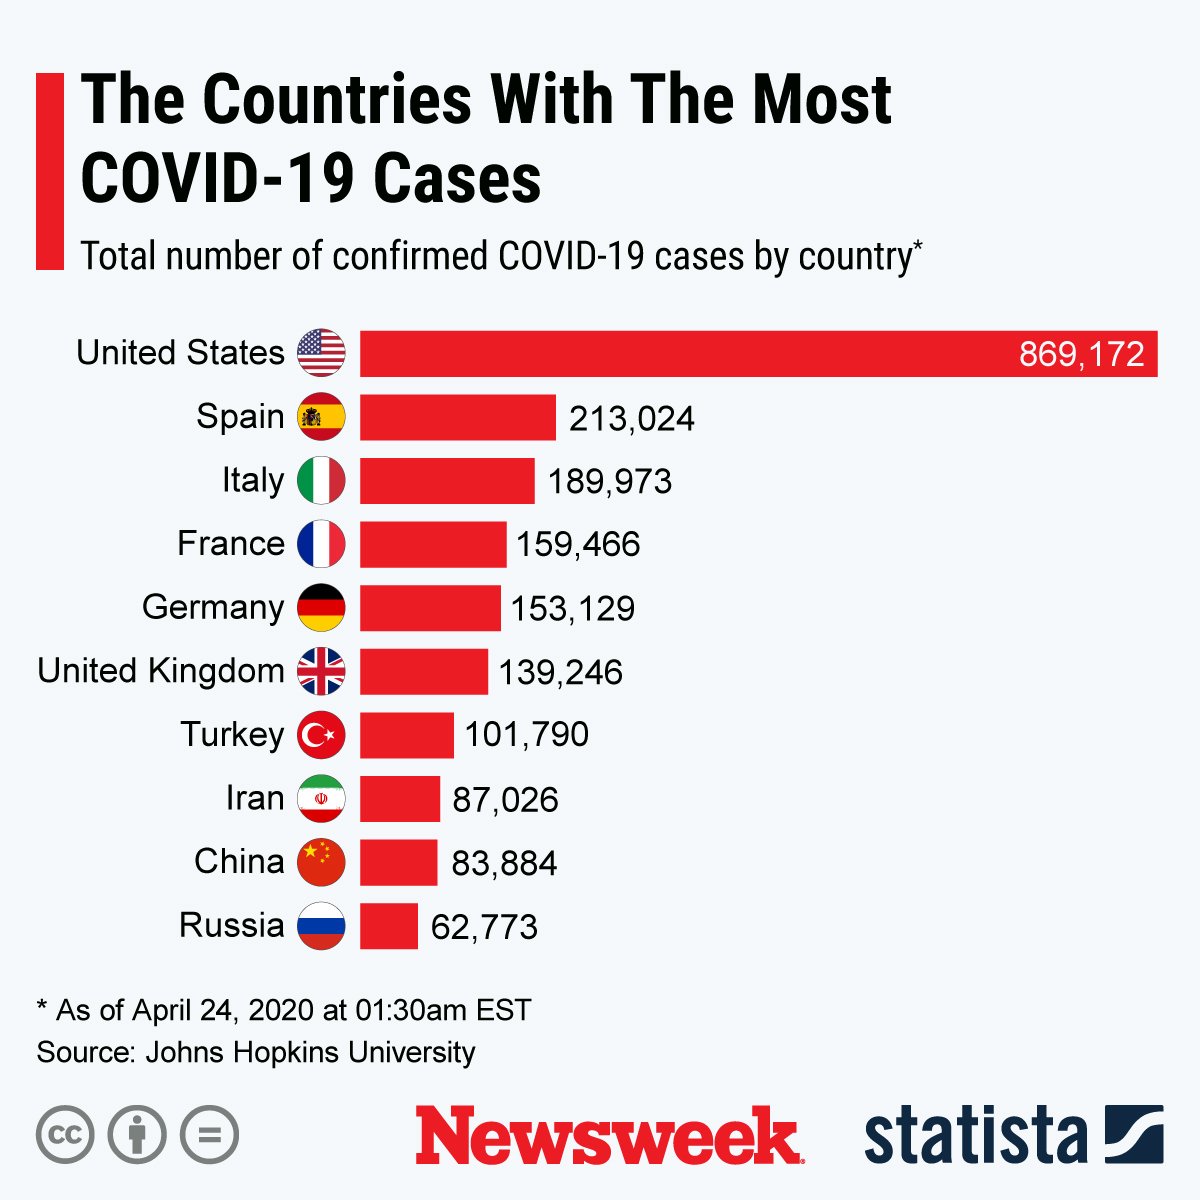 This infographic show the countries with the most COVID-19 cases across the globe.